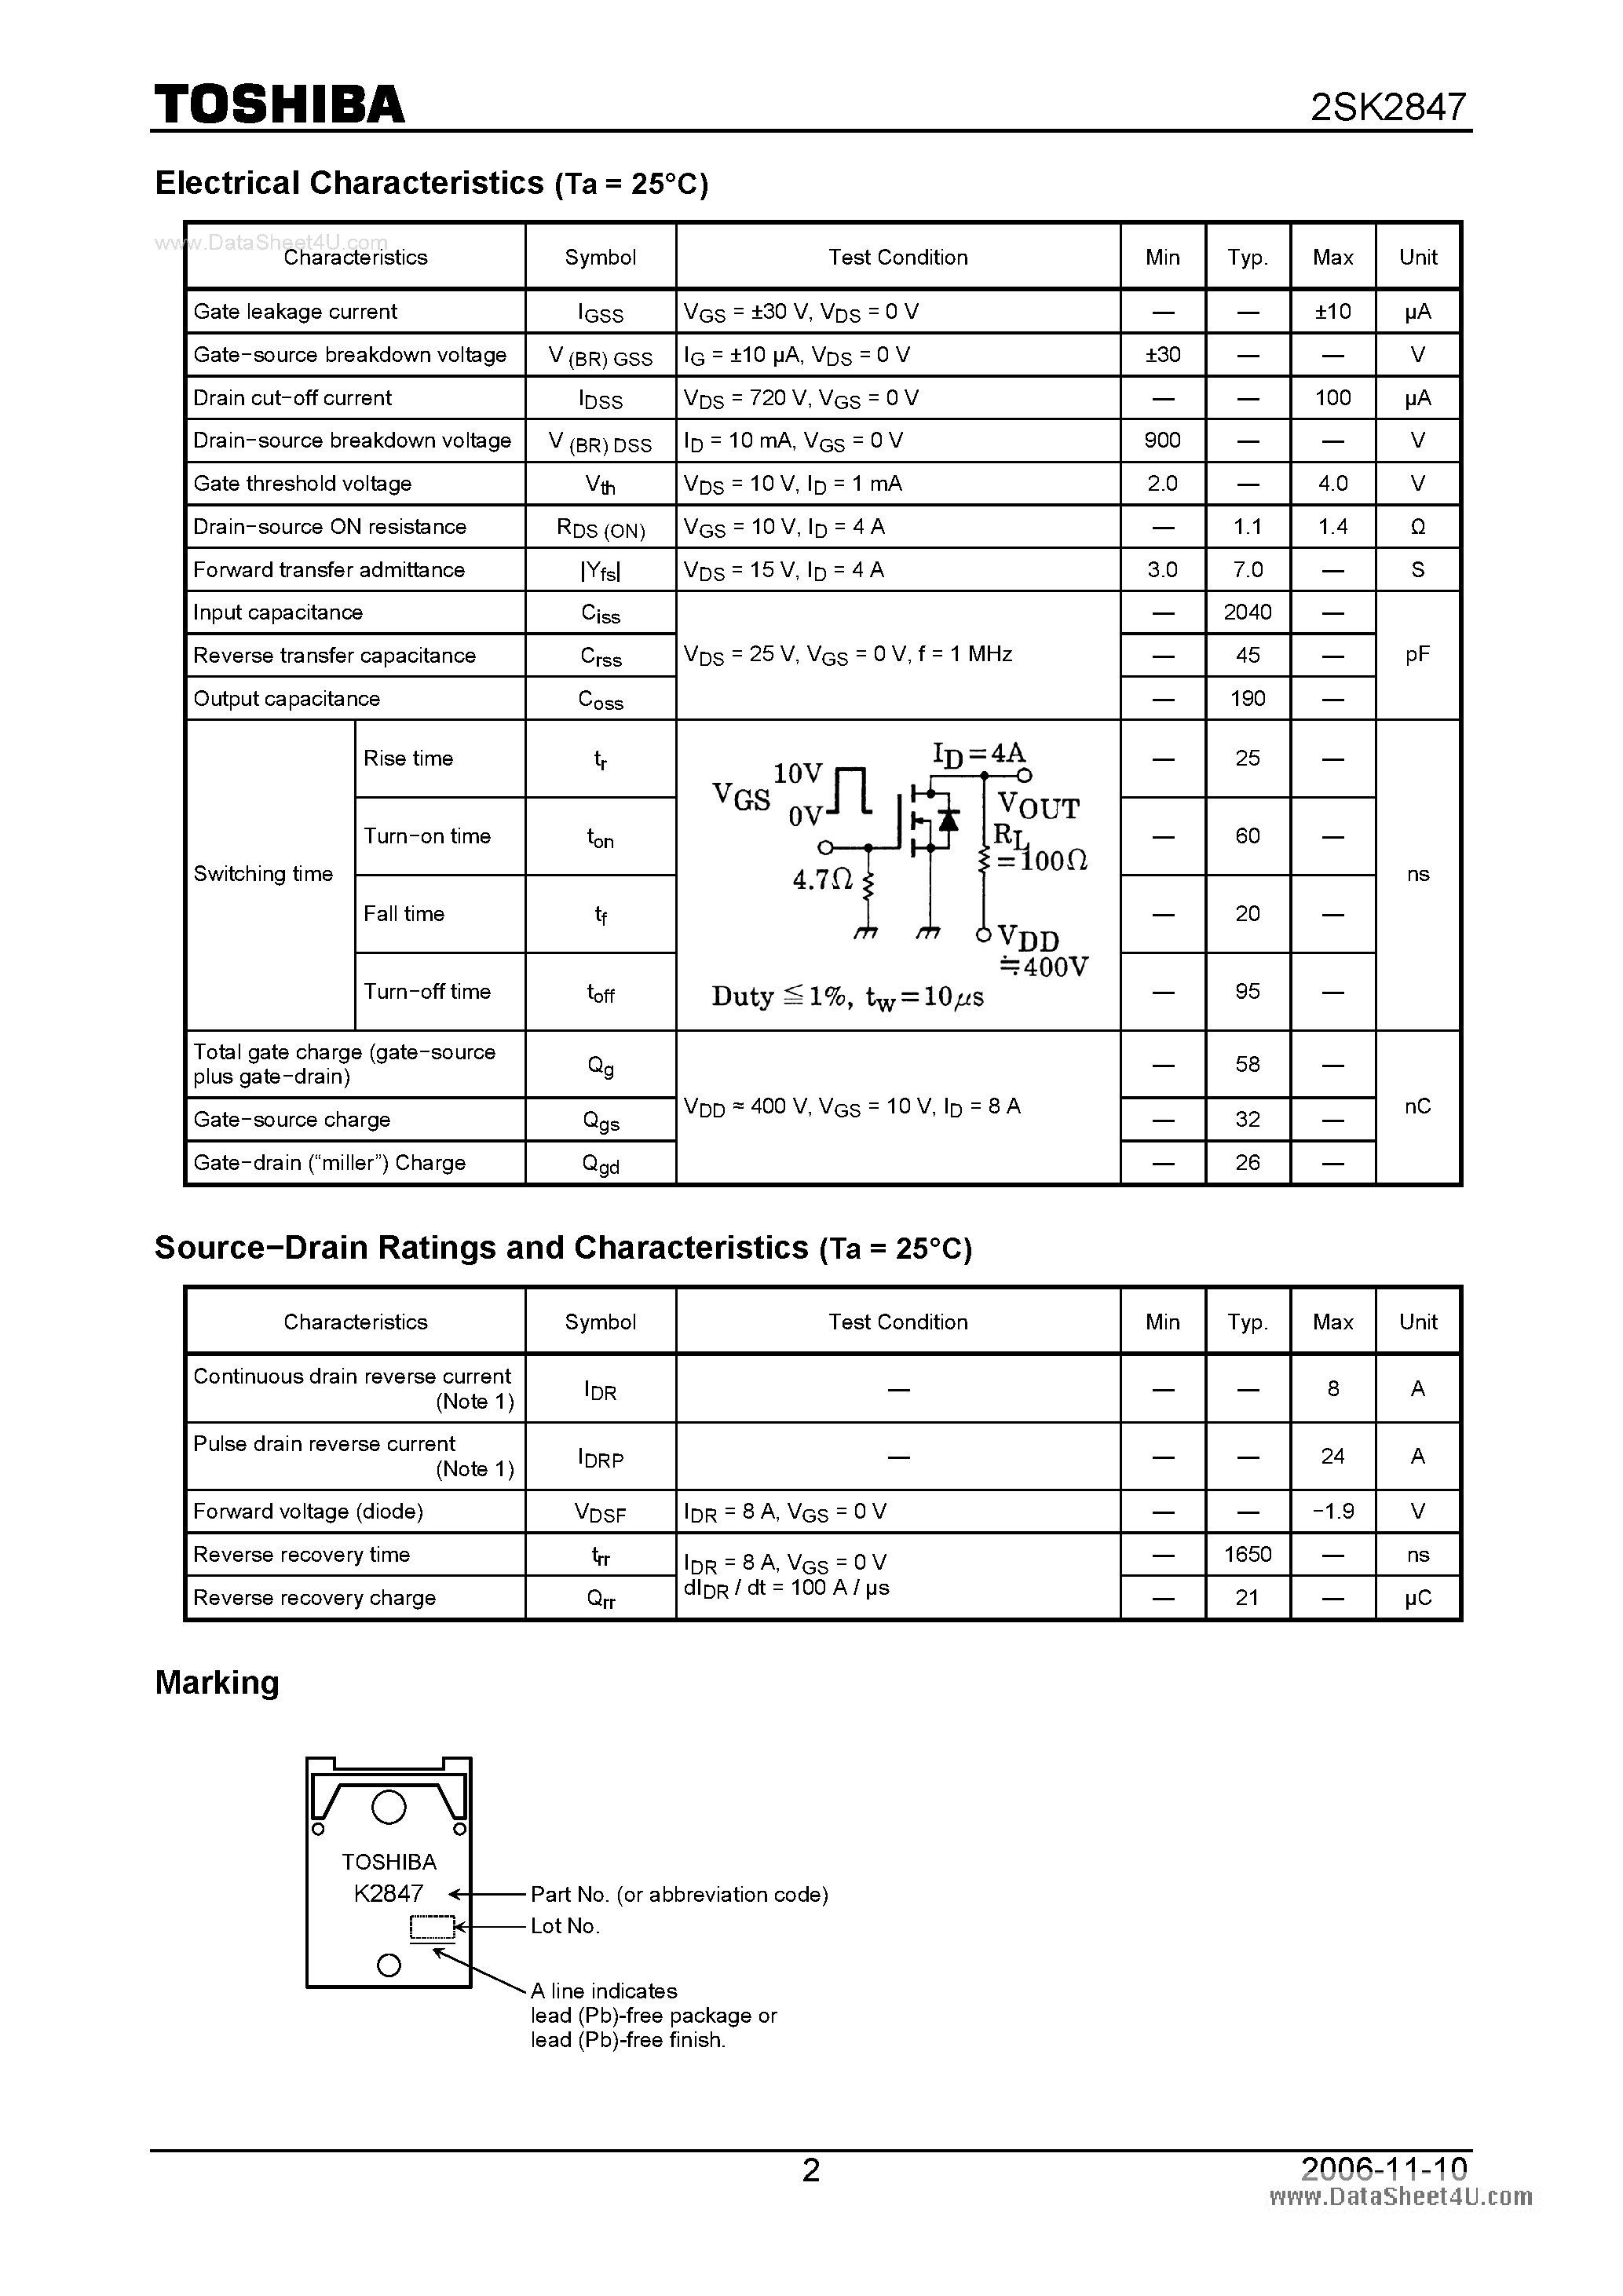 Datasheet K2847 - Search -----> 2SK2847 page 2